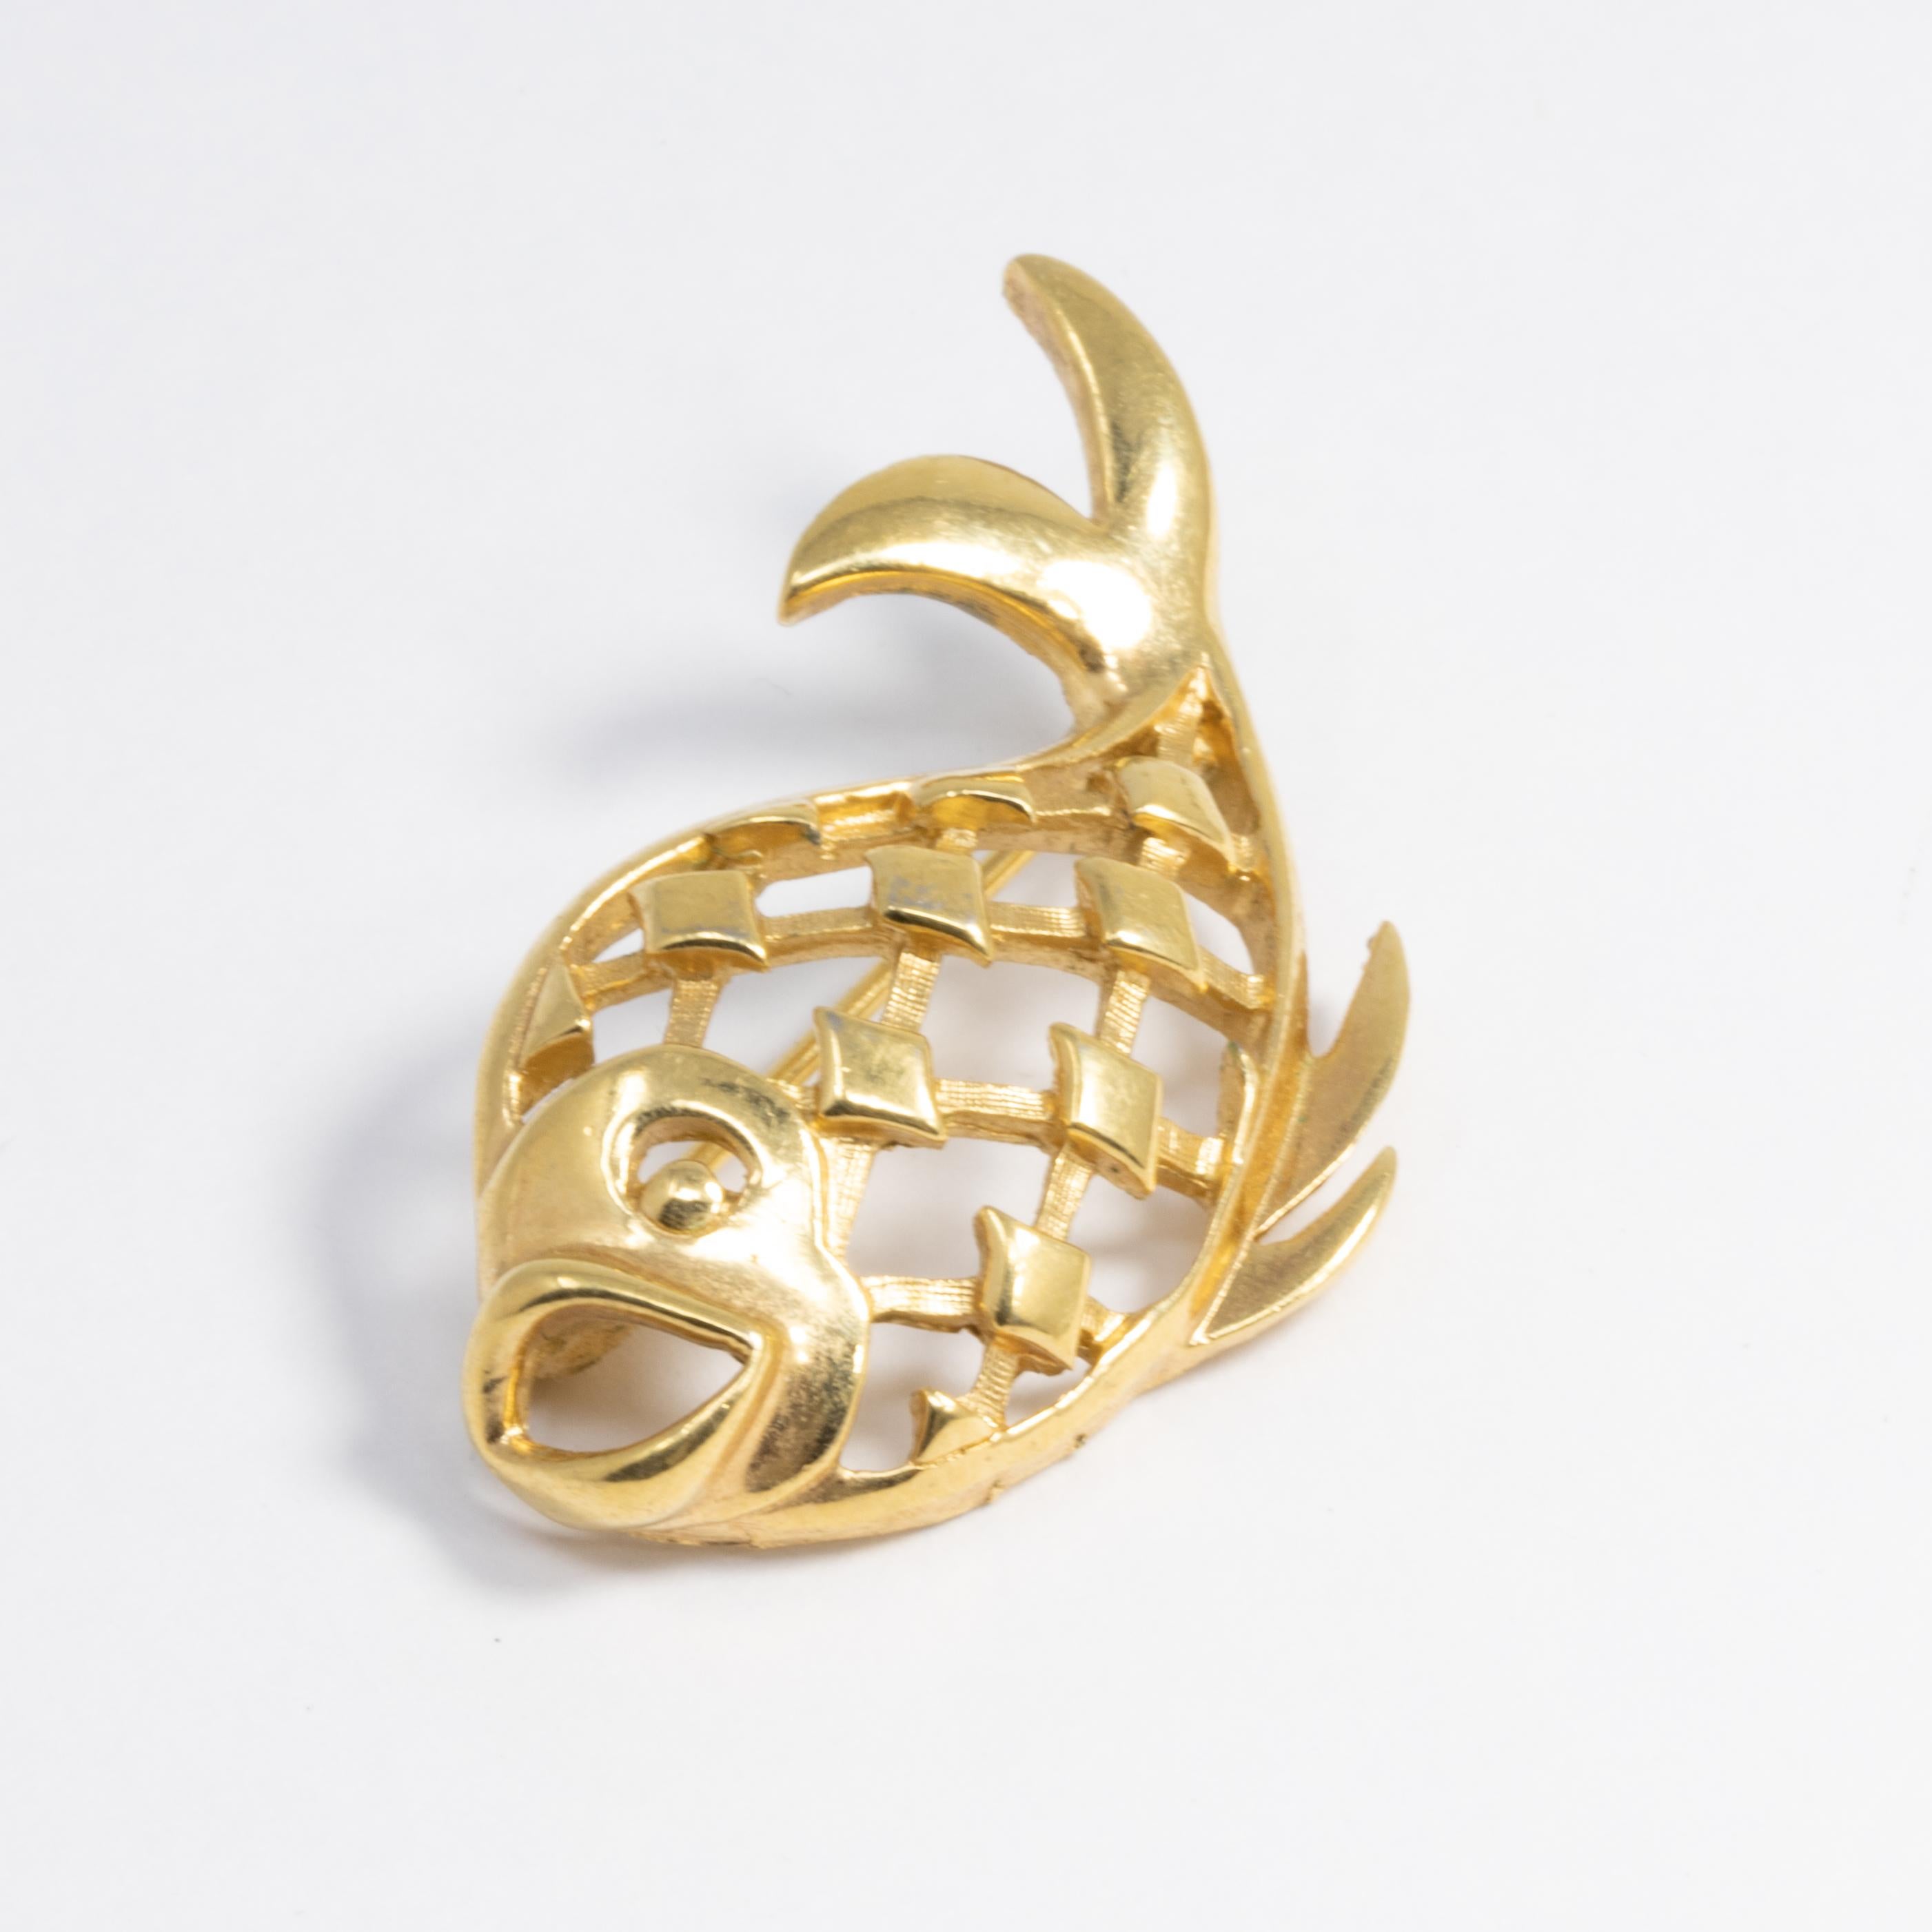 A stylish retro Trifari brooch, featuring a golden fish. This nautical-themed pin adds some class to any style!

Gold filled.

Marks / hallmarks / etc: Trifari